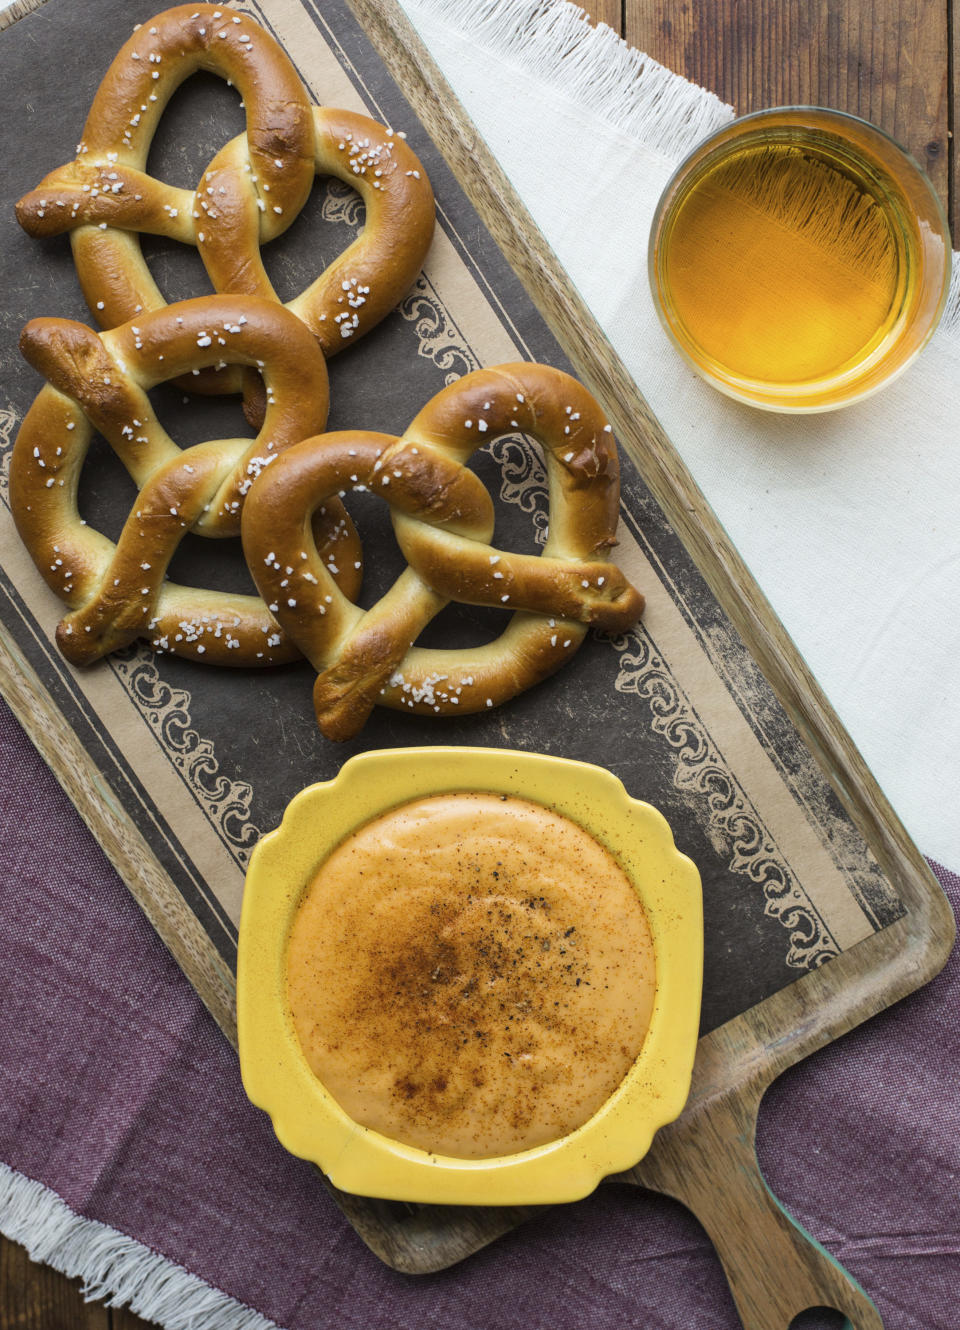 This November 2016 photo shows soft pretzels with hot Cheddar cheese beer dip in New York. This dish is from a recipe by Katie Workman. (Sarah Crowder via AP)